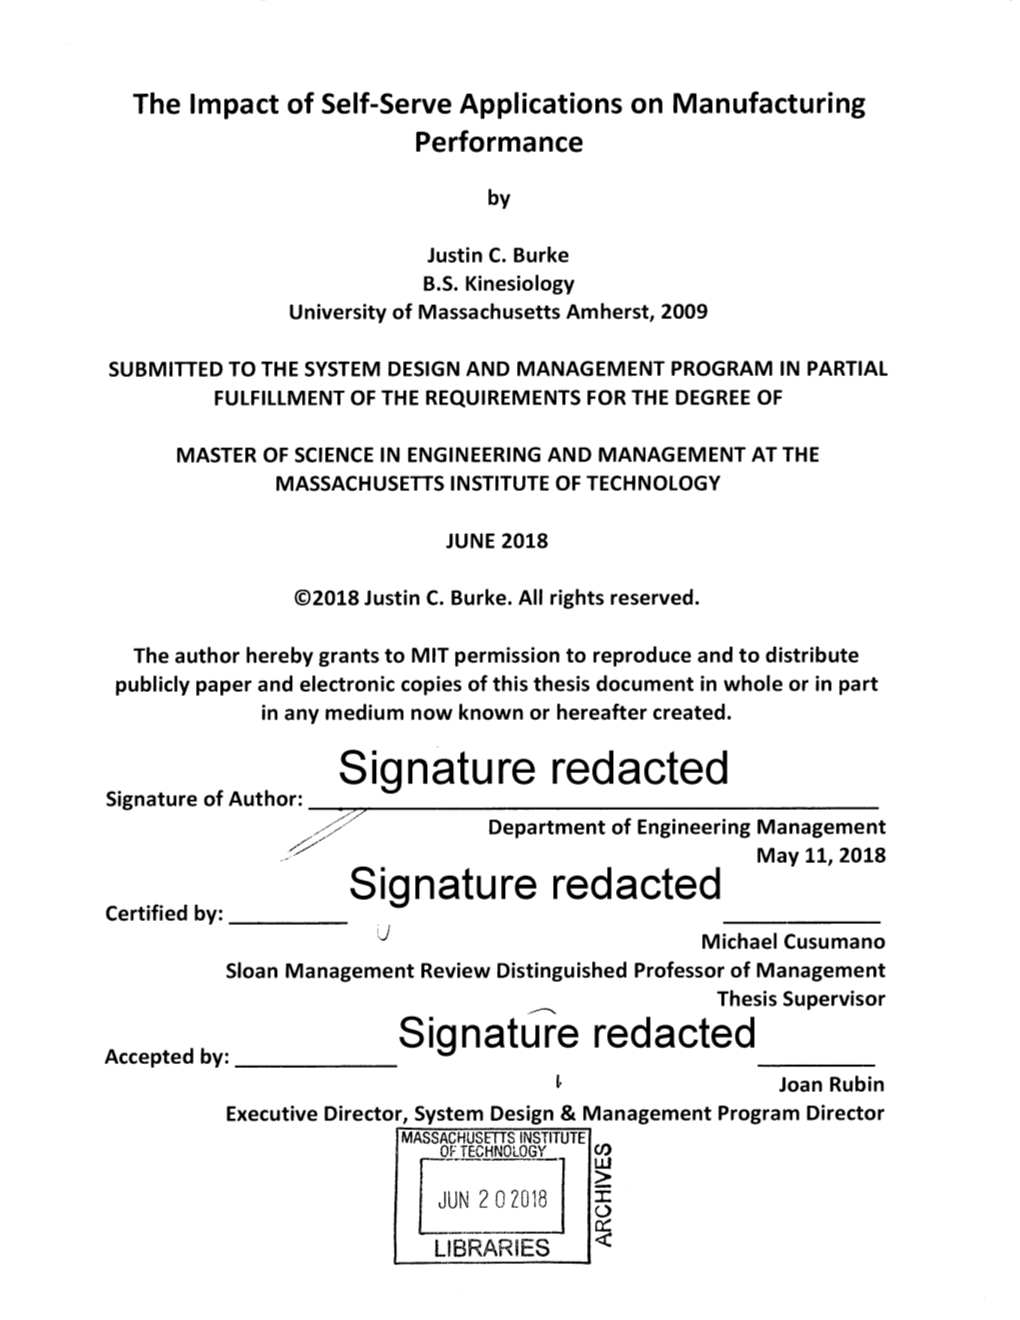 Signature Redacted Department of Engineering Management May 11, 2018